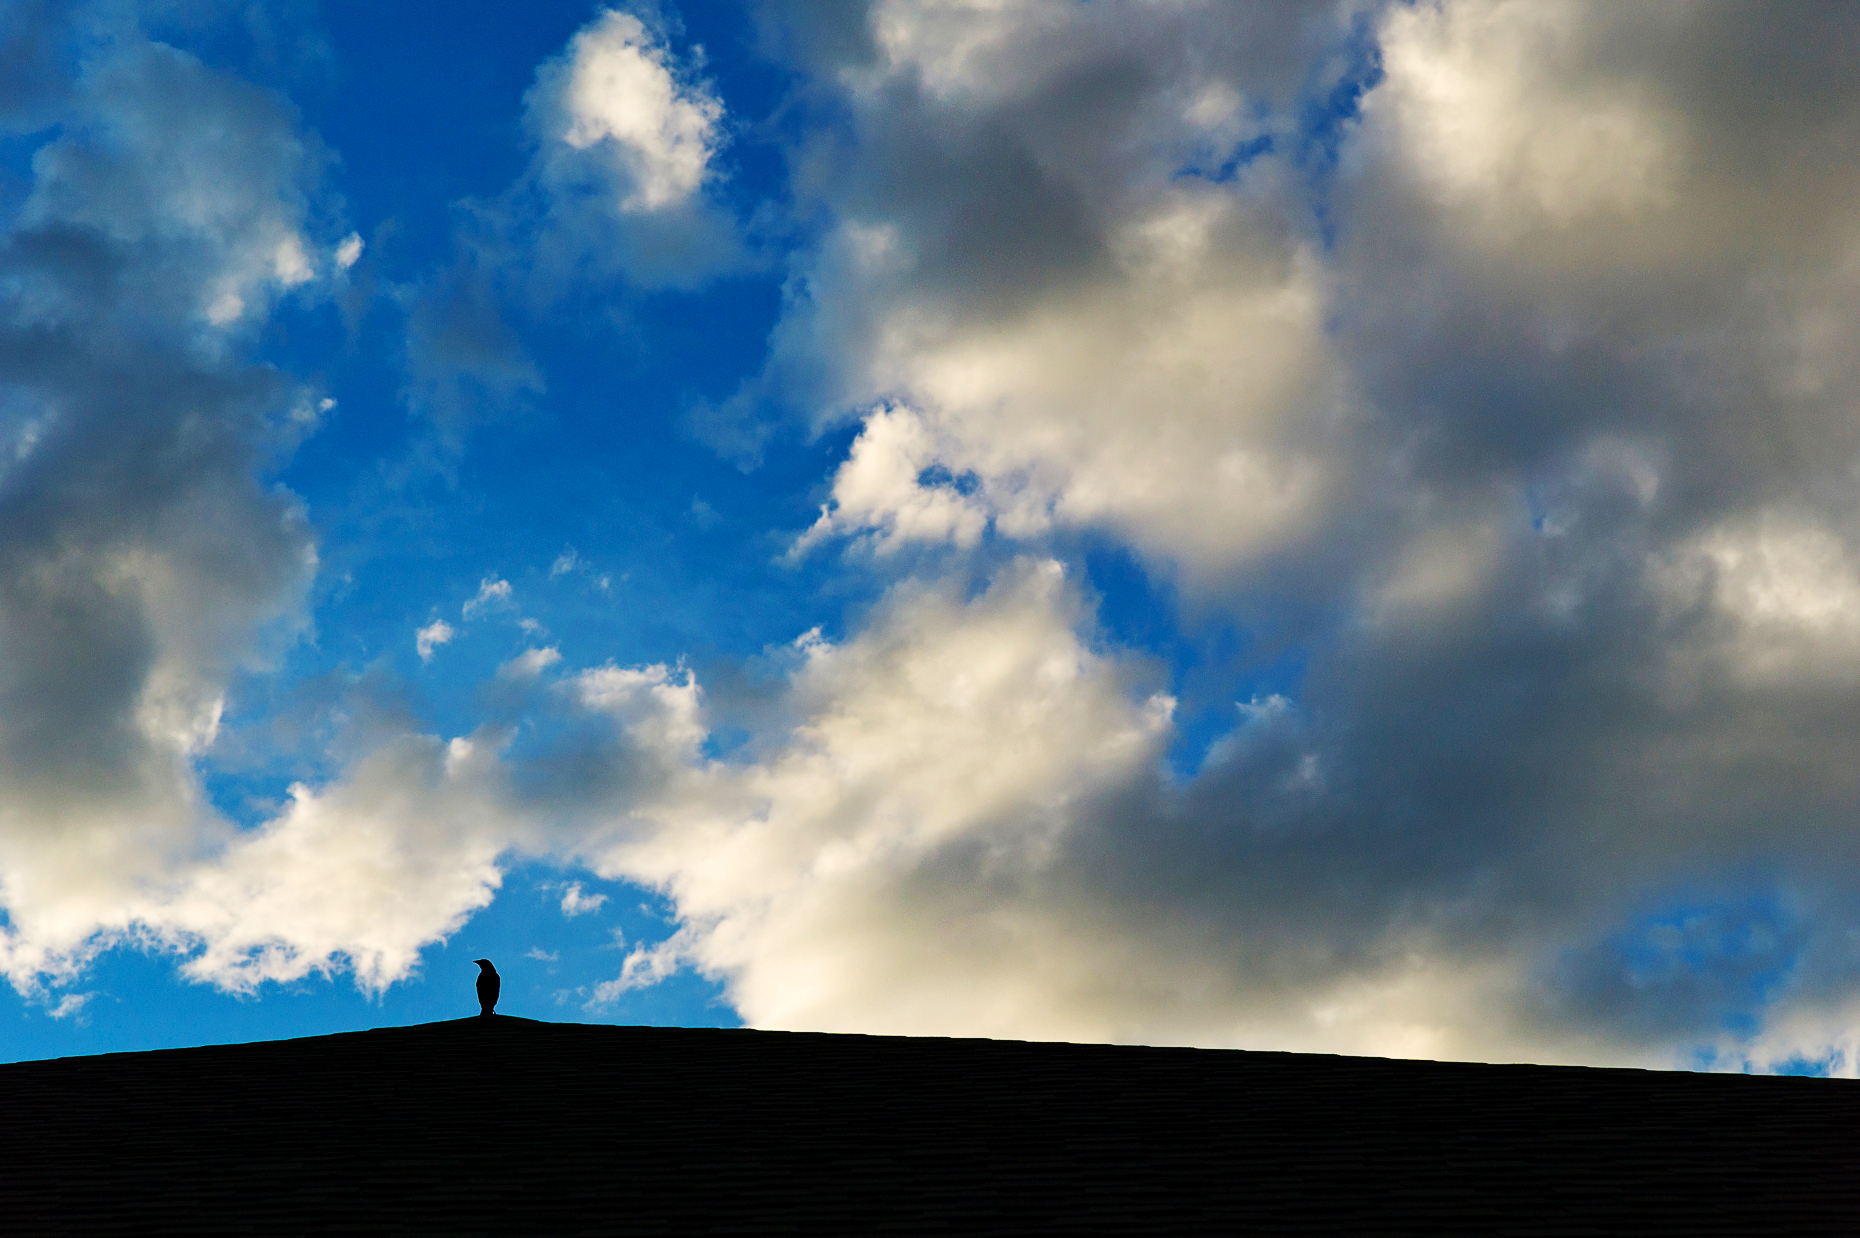 Blackbird silhouetted on roof against puffy white sunset clouds and a clear blue sky